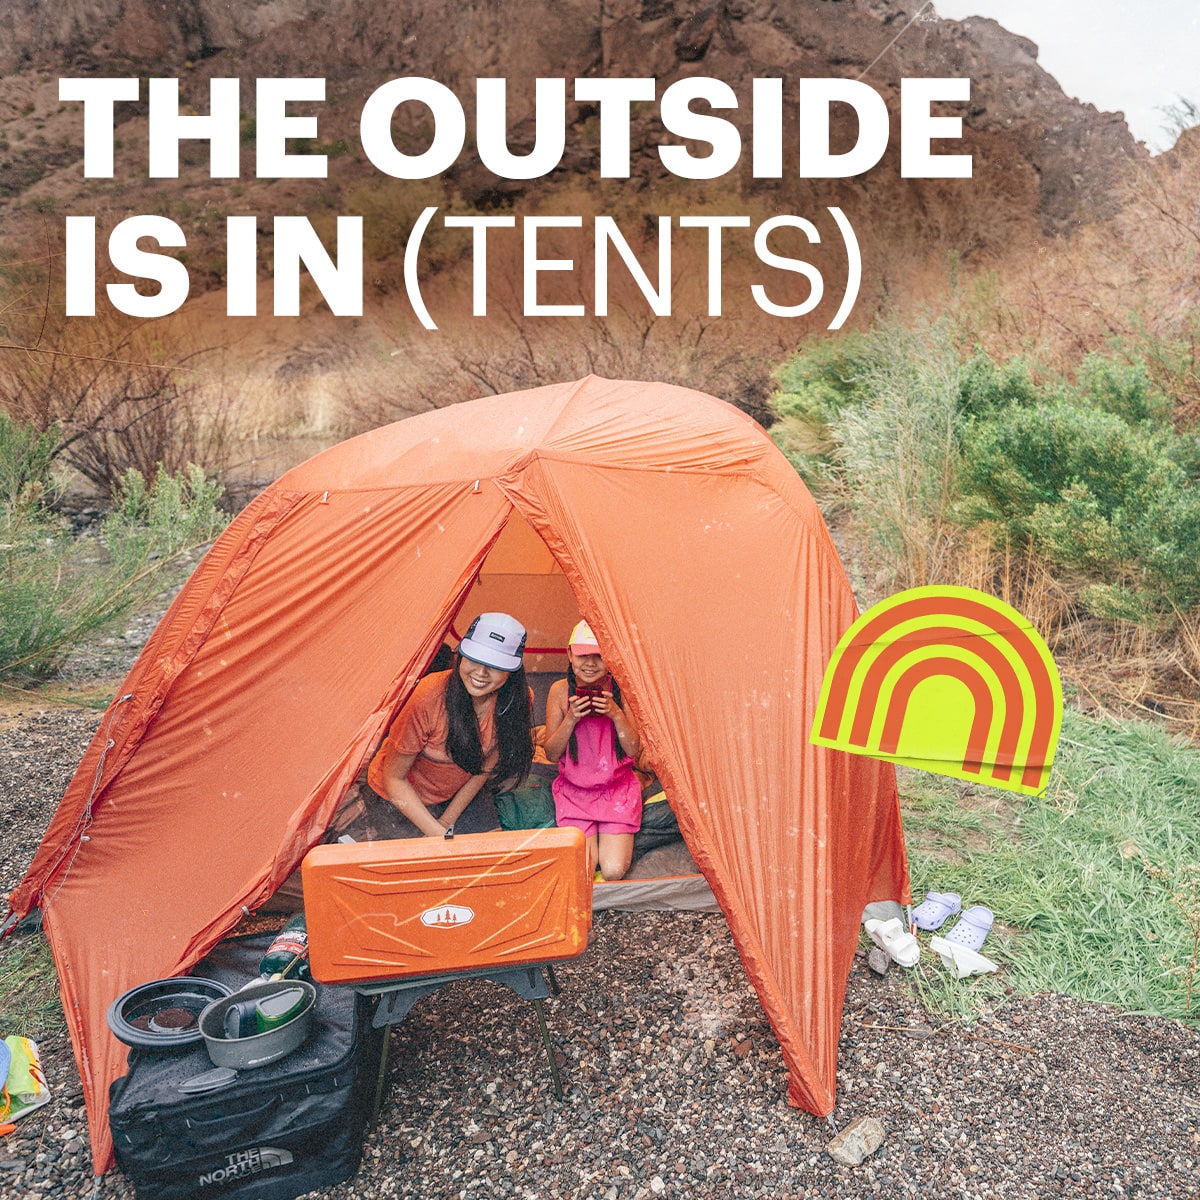 The outside is in (tents).